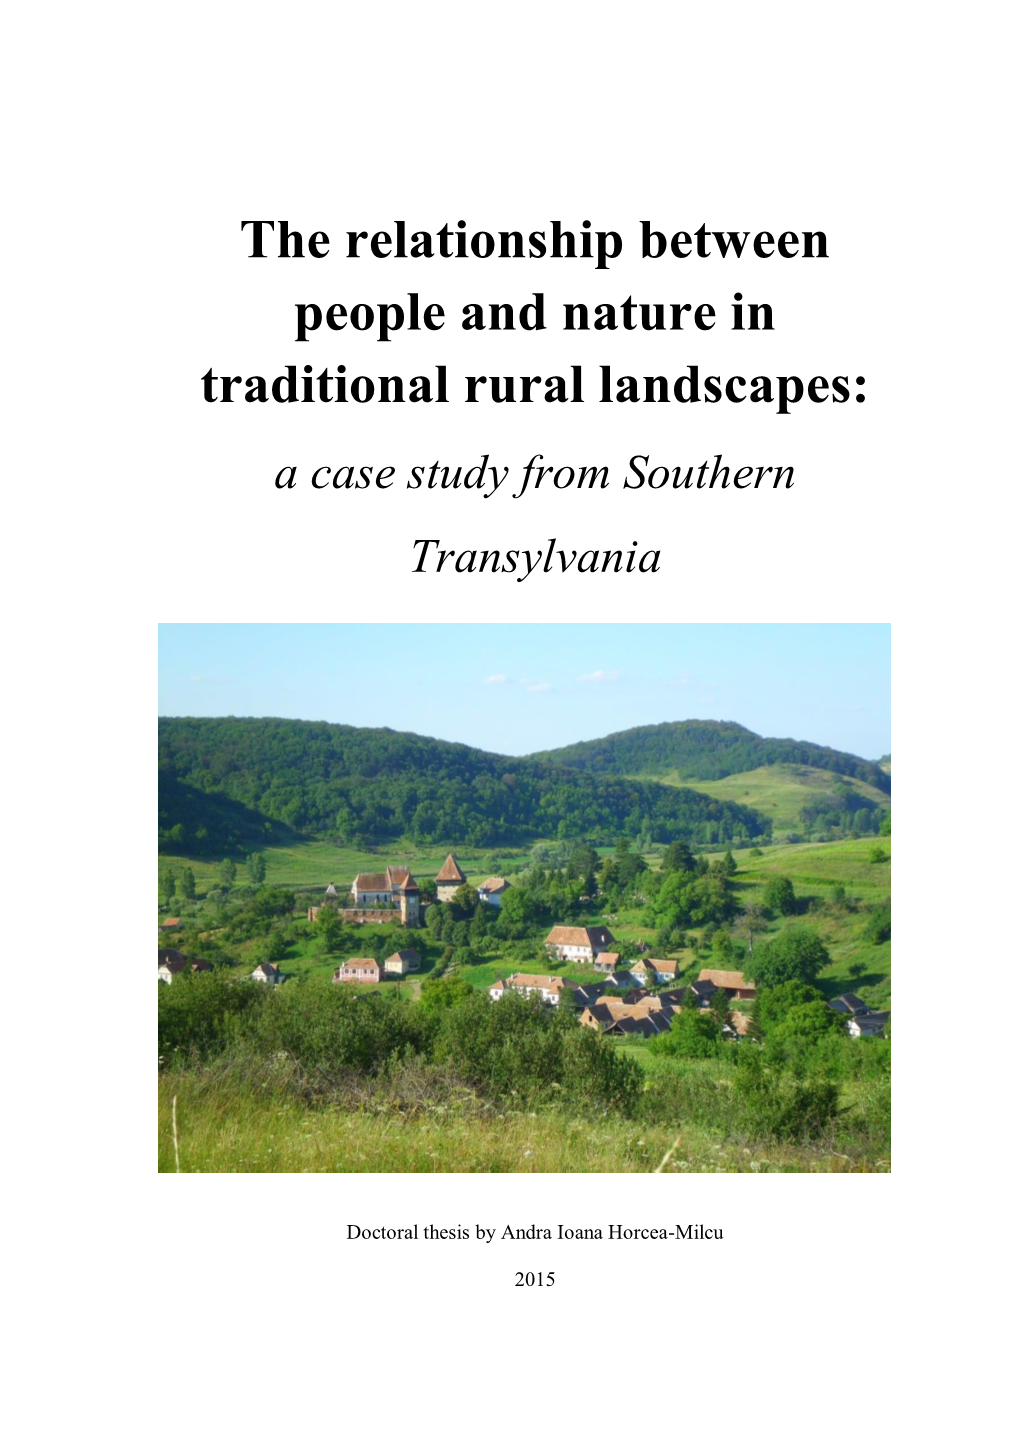 The Relationship Between People and Nature in Traditional Rural Landscapes: a Case Study from Southern Transylvania